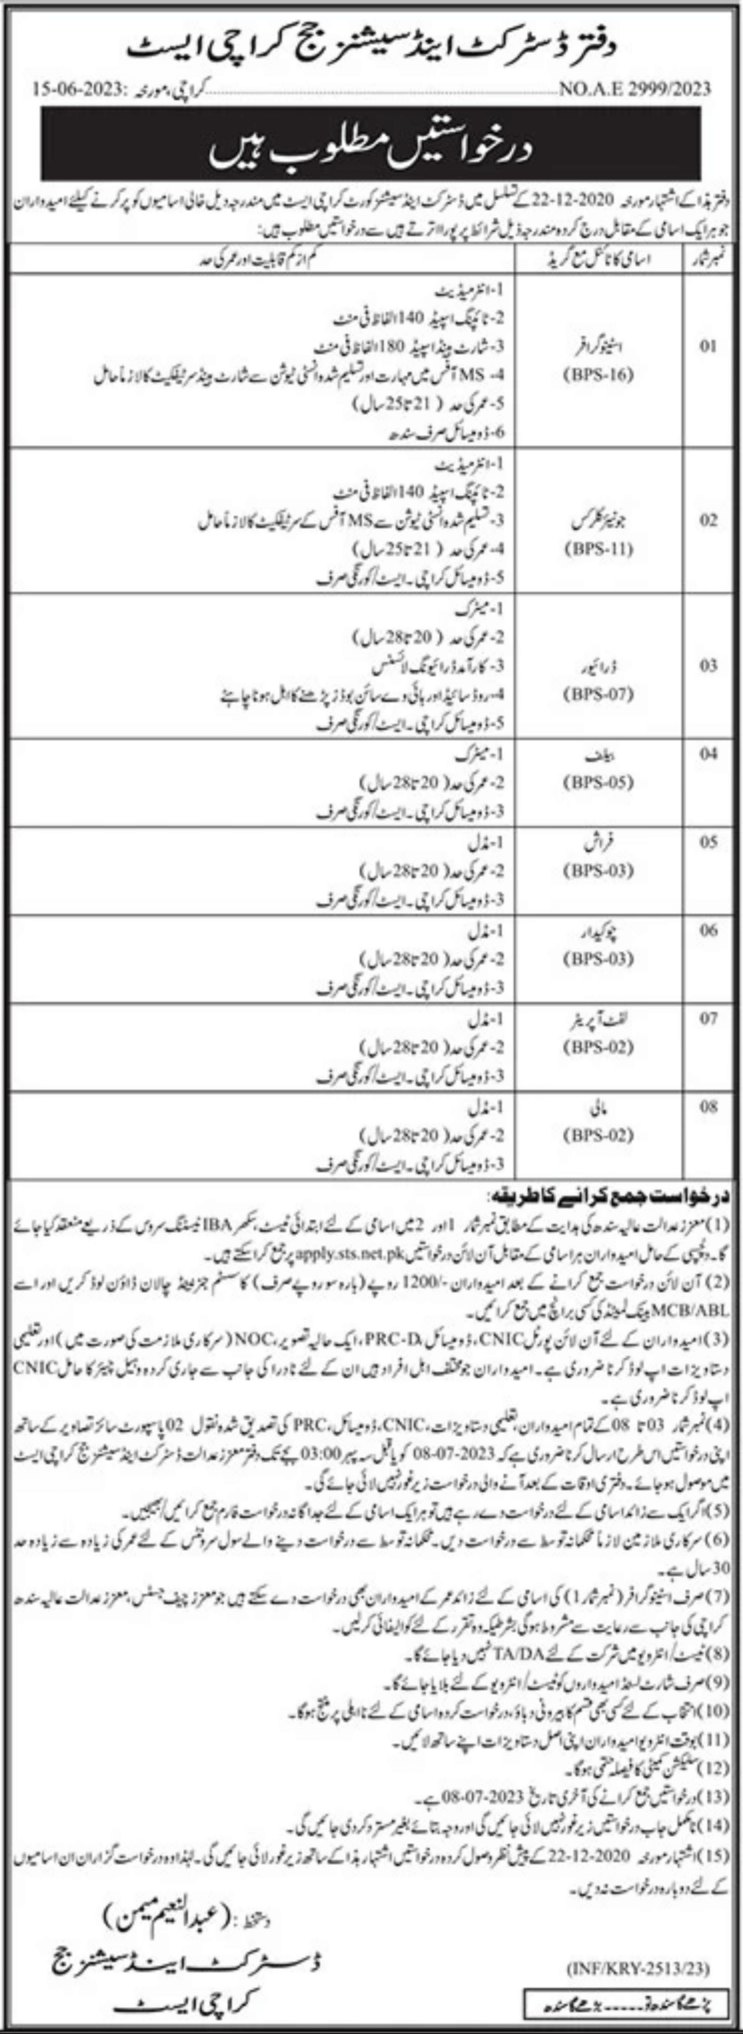 District and Session Courts Karachi Jobs 2023Kawish Newspaper has published an advertisement for Jobs in District and Session Courts 2023 on 19 June 2023. . These Post are Published in the Kawish Newspaper on 19 June 2023. About Jobs in District and Session Courts 2023: Jobs in District and Session 2023 announced in Karachi. The official advertisement can be seen below. Applications are invited from Pakistani Nationals who have local domicile on regular basis. Eligible candidates fulfill the eligibility criteria can apply for these posts. Age, qualification, experience, and domicile prescribed for the posts are mentioned against each in the advertisement given below .prescribed for the posts are mentioned against each in the advertisement given below. Title Details Date Posted June 19, 2023 Hiring Organization District and Session Courts Last Date July 08, 2023 Source Kawish Newspaper No of Seats Multiple Jobs Location Karachi, Sindh Employment Type Permanent Vacancies Details of Jobs in District and Session Courts 2023 Sr. No Post Name Qualification 1. Stenographer Intermediate 2. Junior Clerk Intermediate 3. Driver Matric 4. Belf Matric 5. Frash Middle 6. Chowkidar Middle 7. Lift Operator Middle 8. Malshi Middle How to Apply for Jobs in District and Session Courts? 1. Each candidate is required to submit their application form along with attested copies of the mentioned documents to the given address. • Educational certificates • CNIC • Domicile • Character certificate • 02 passport size photographs 2. Must fill your application form with your Full Name, Father’s Name, Date of Birth, Address, CNIC No, Phone Number, and Education. 3. Each candidate must bring Original Educational Certificates, Domicile and CNIC at the time of test/interview. 4. Last date to submit the application form in District and Session Courts Karachi Jobs is 08th July 2023. Official Advertisement for Jobs in District and Session Courts 